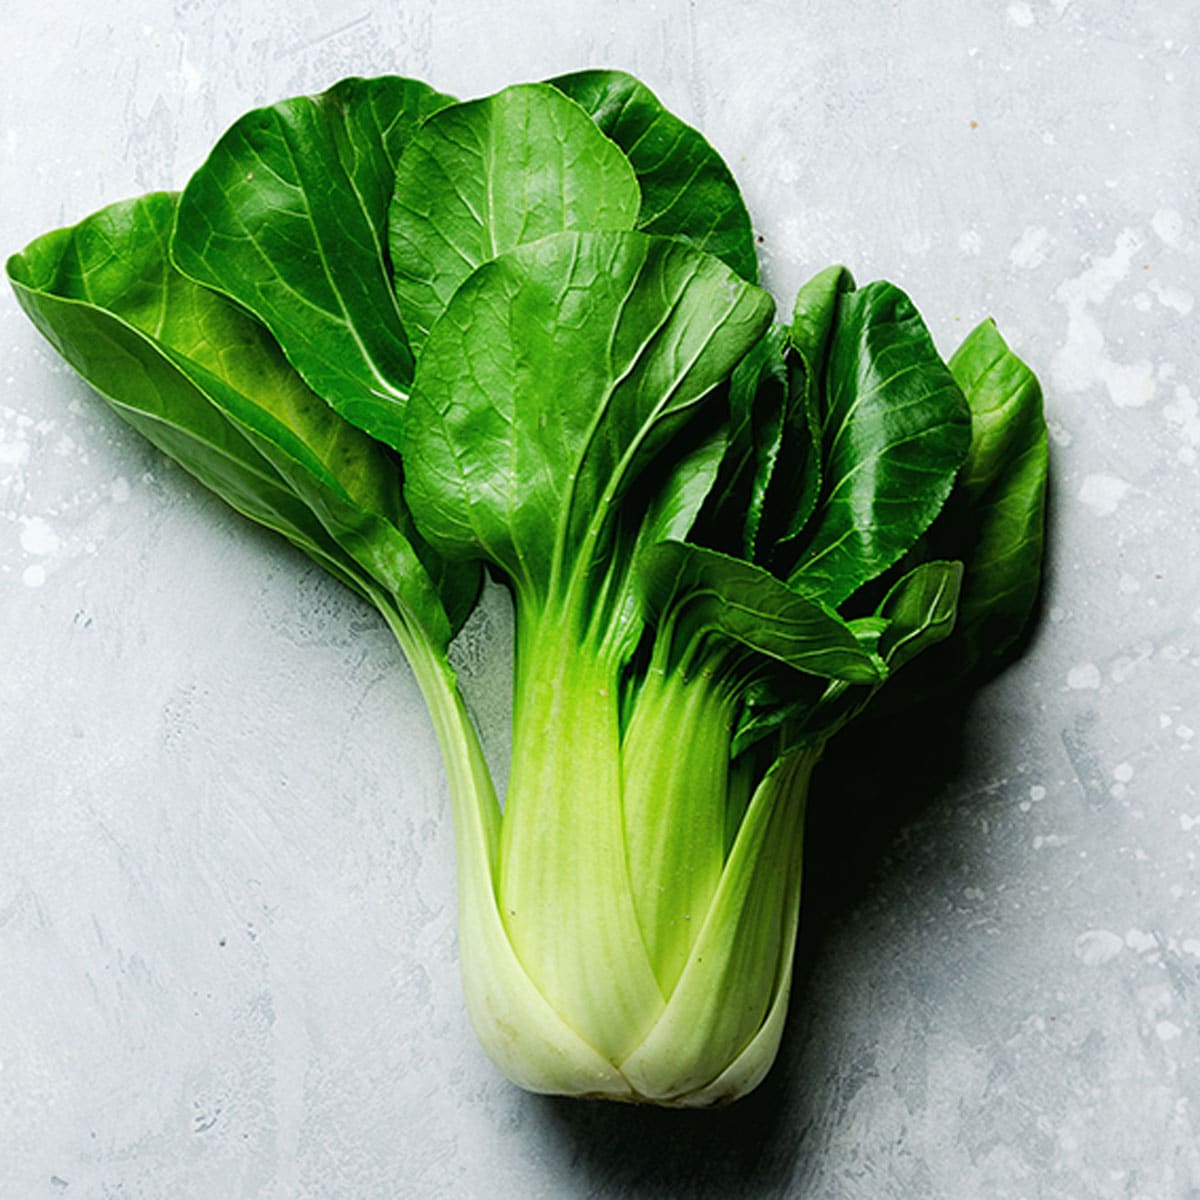 The idea behind blanching is not to cook the vegetable but only to part cook it so that it retains its texture and color. The importance of immersing the Bok Choy in ice-cold water cannot be overstated as it is this that prevents it from cooking.